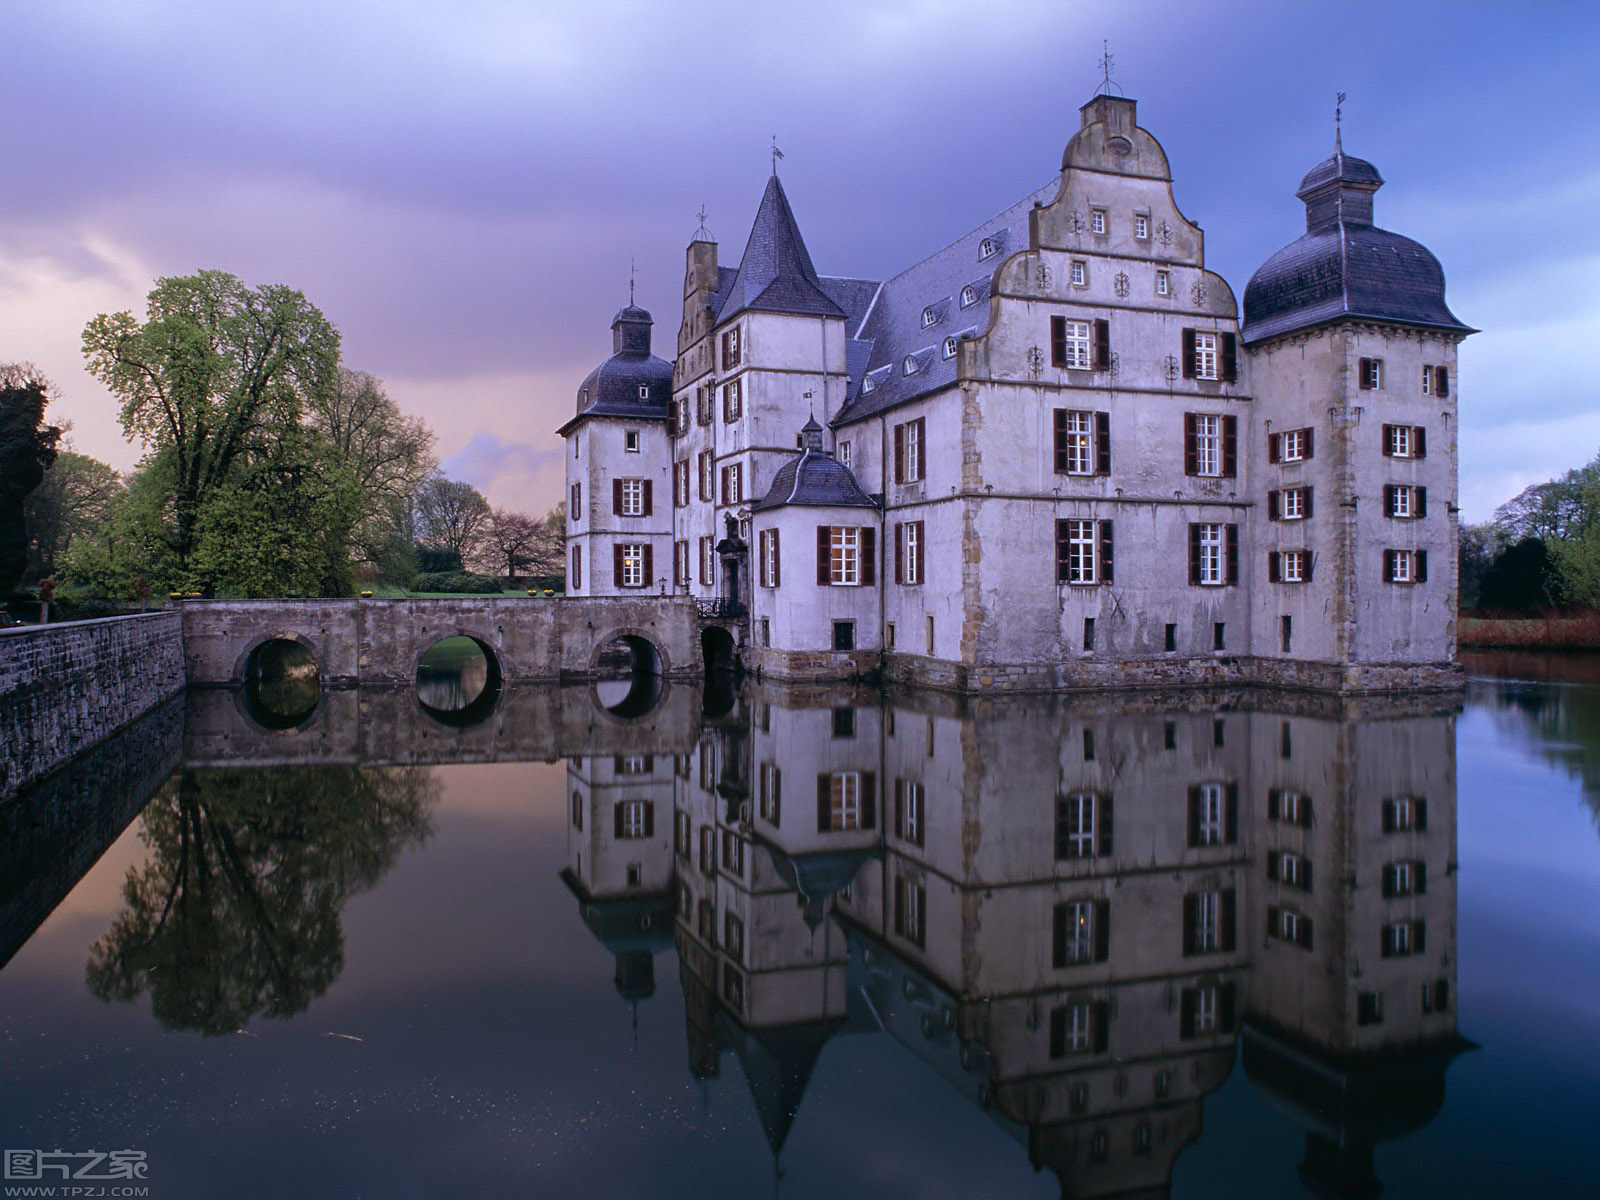 the reflection of an old castle on a large body of water